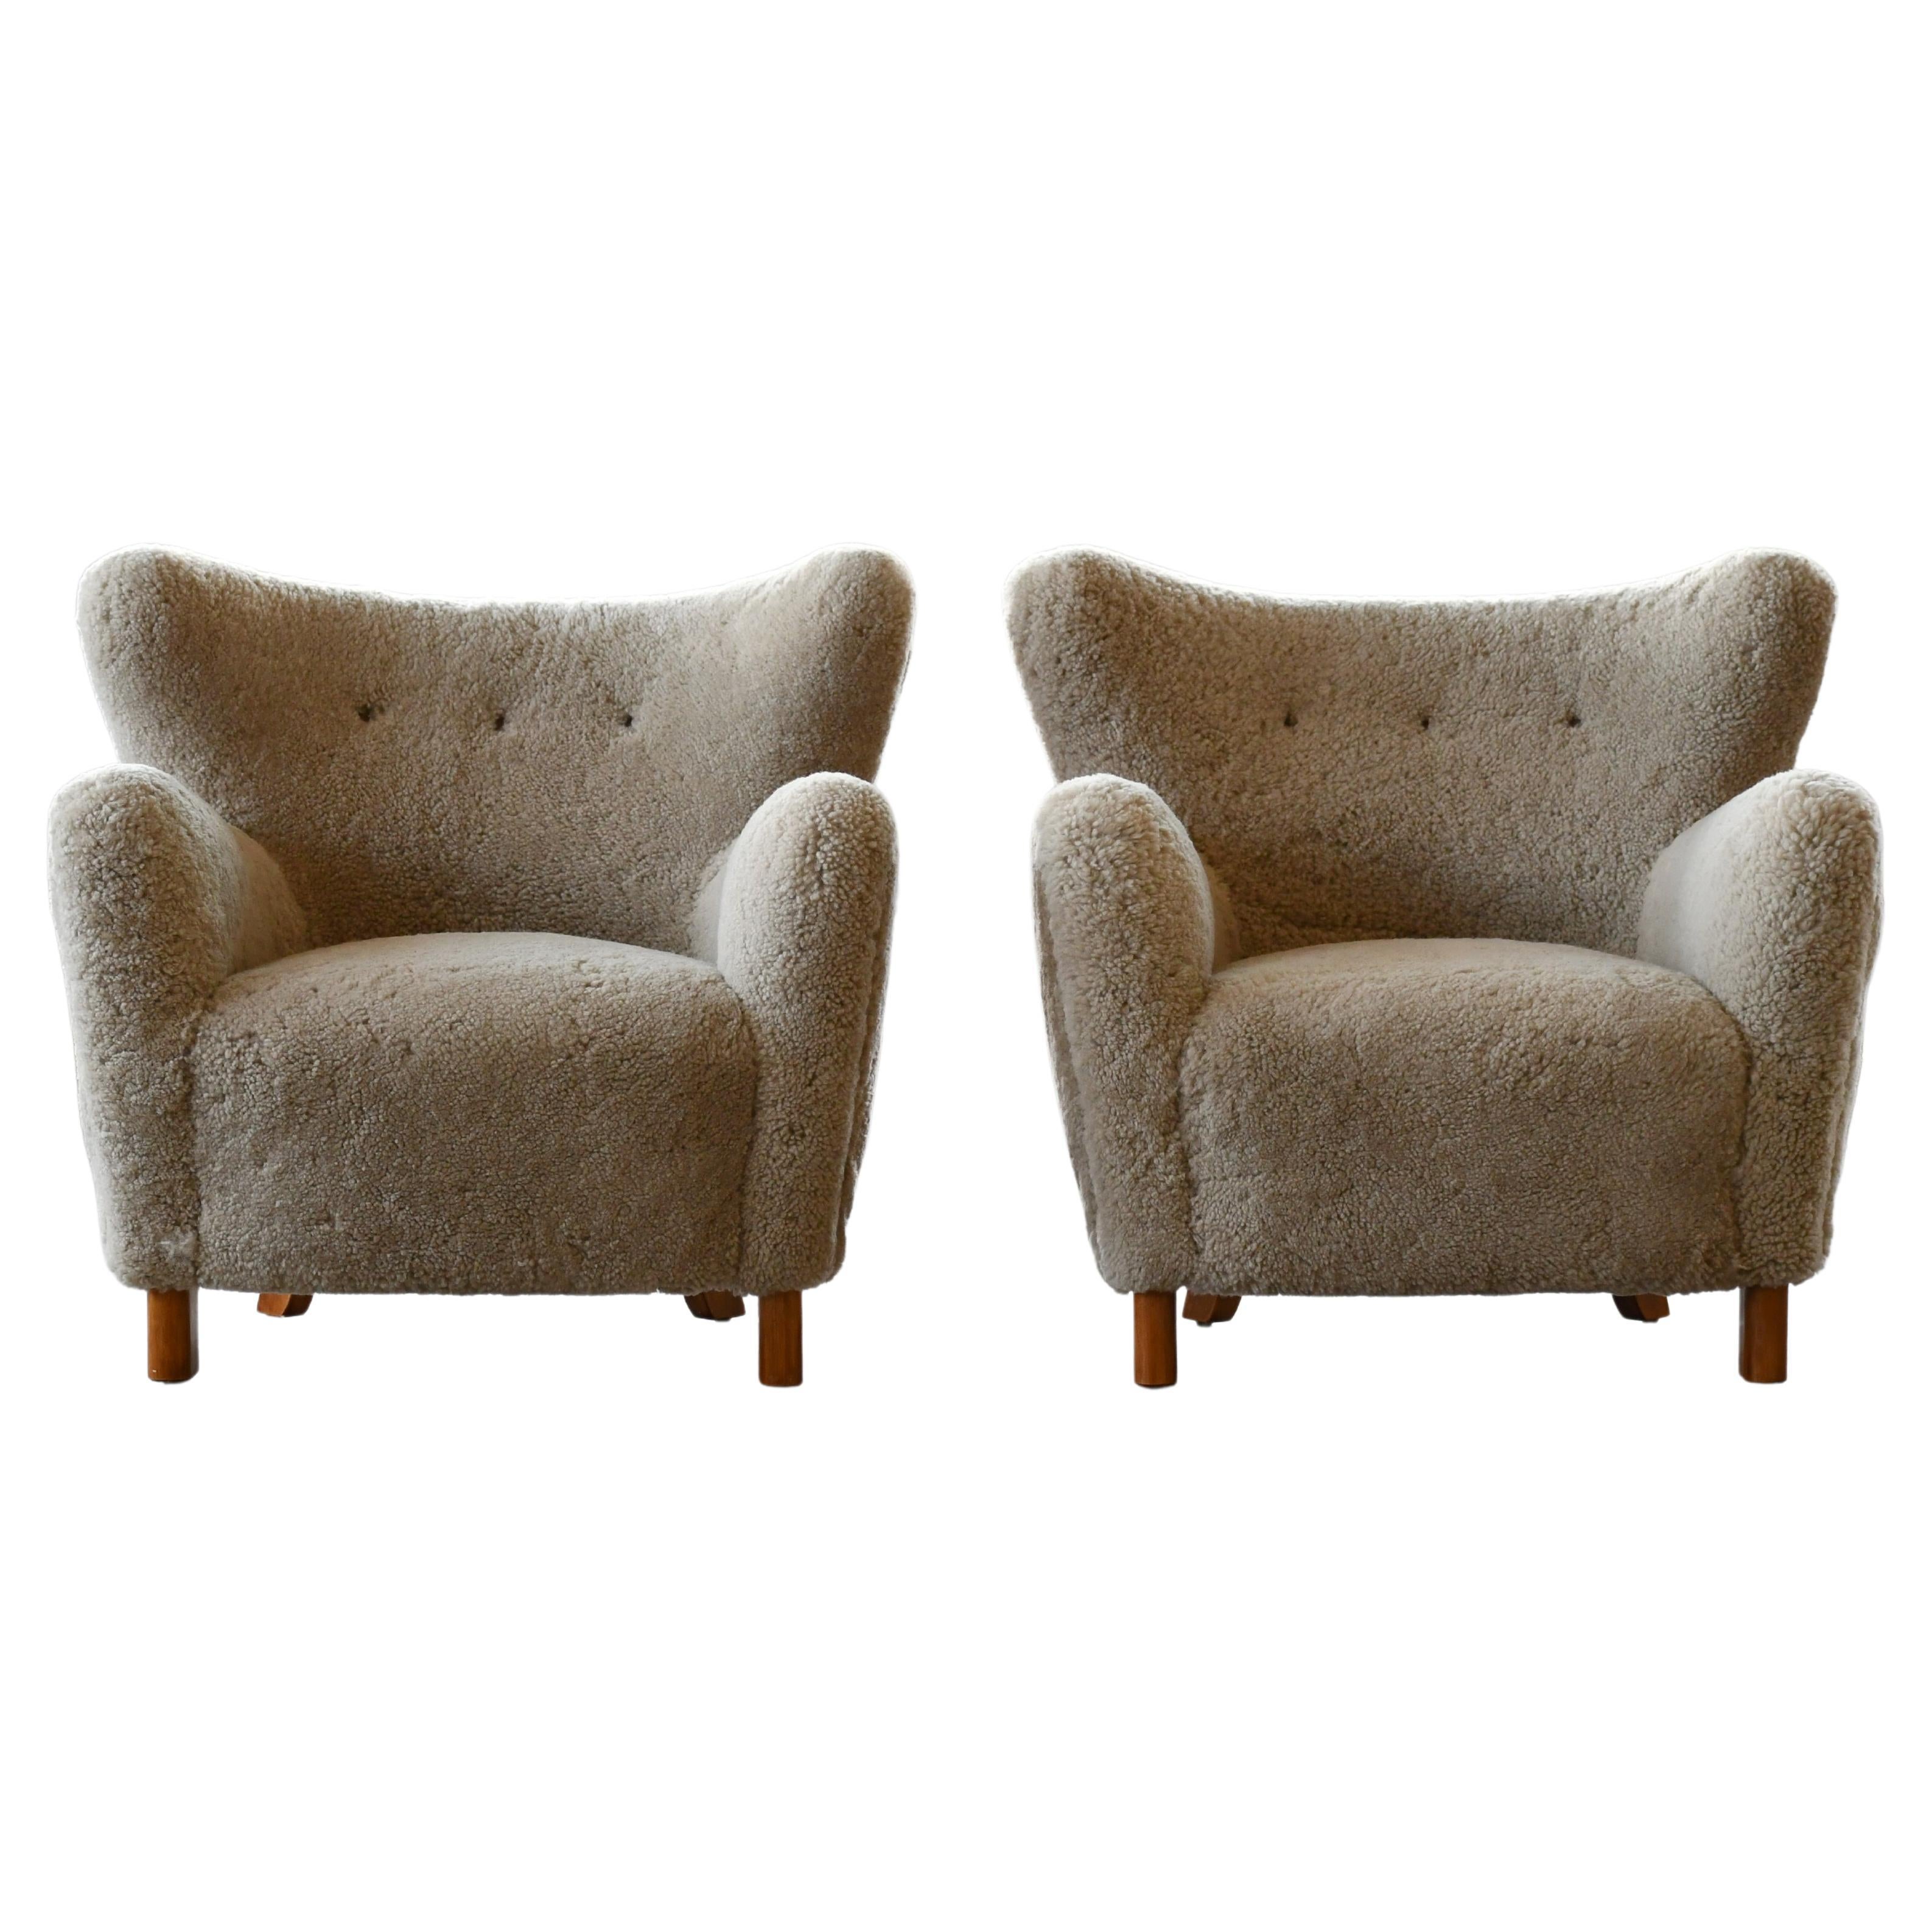 Pair of 1940's Style Classic Club or Lounge Chairs in Grey Shearling